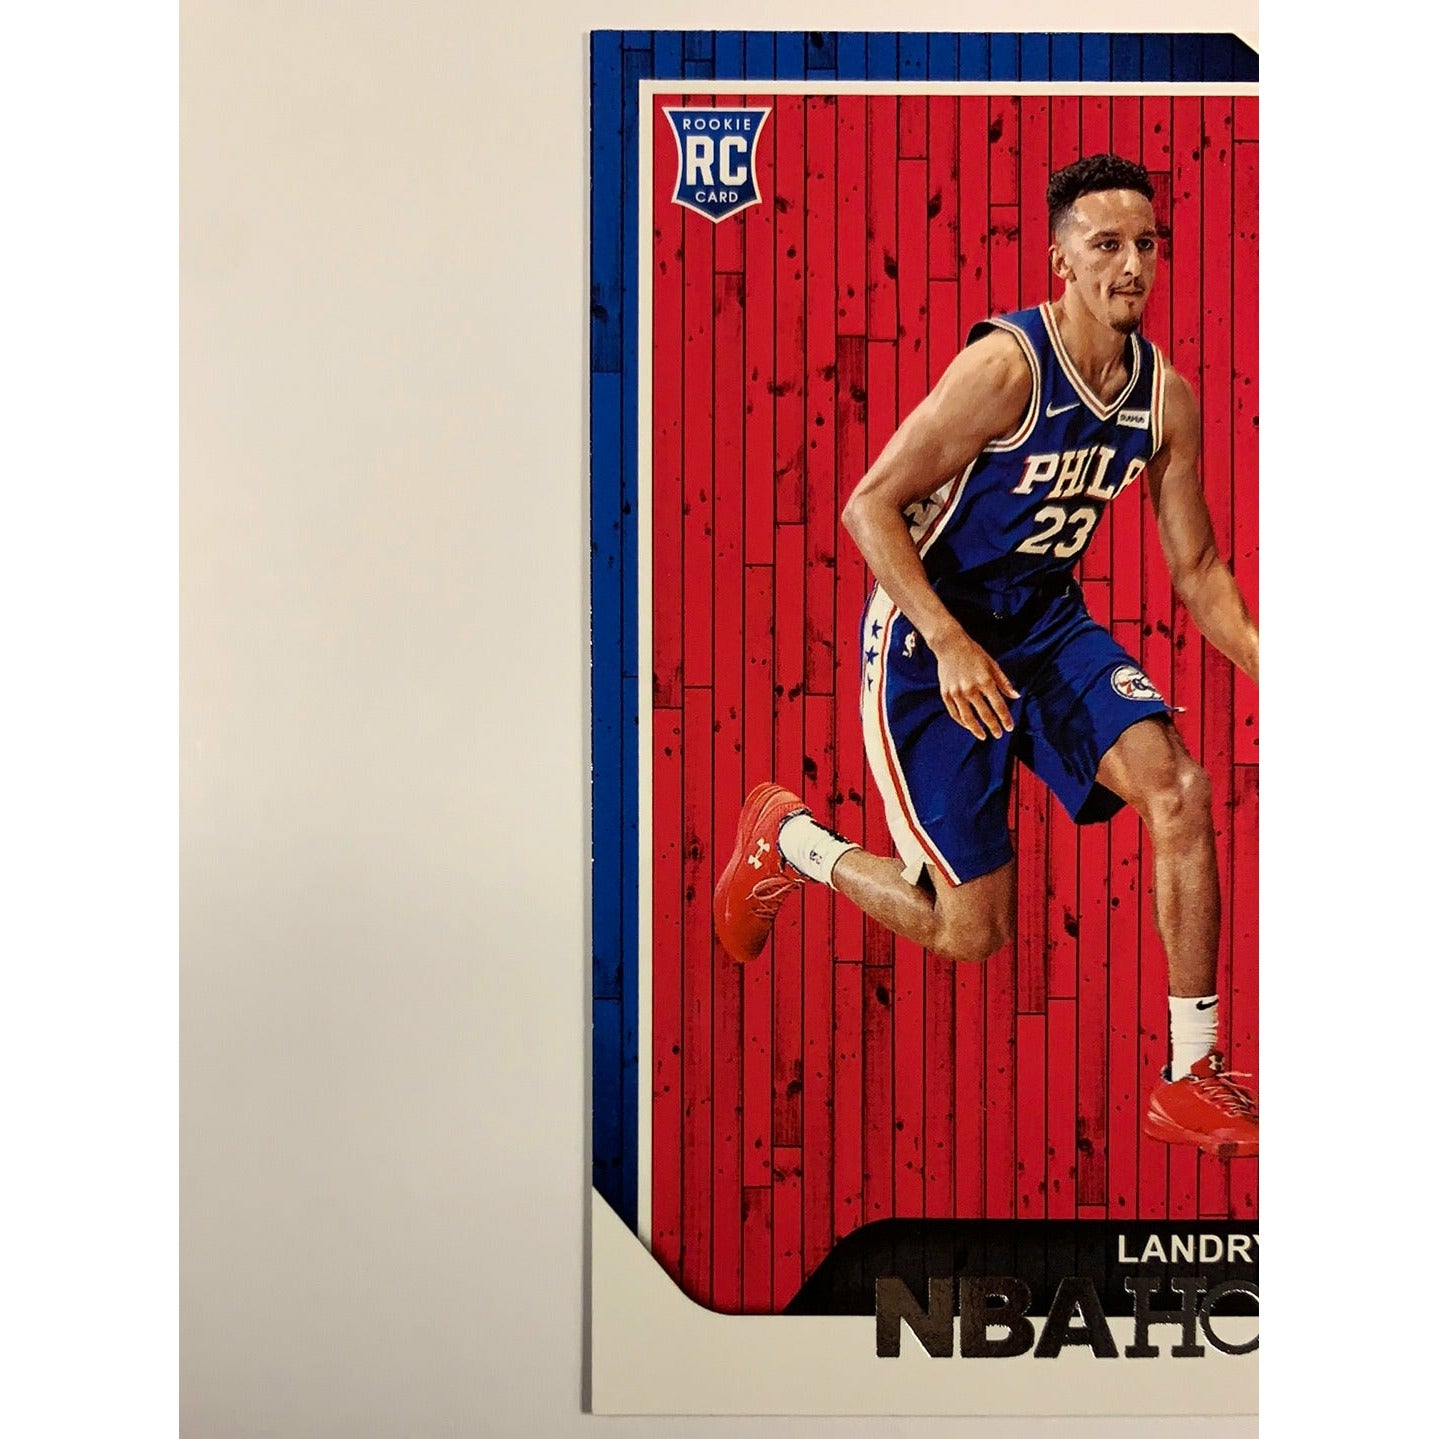  2018-19 Hoops Landry Shamet RC  Local Legends Cards & Collectibles